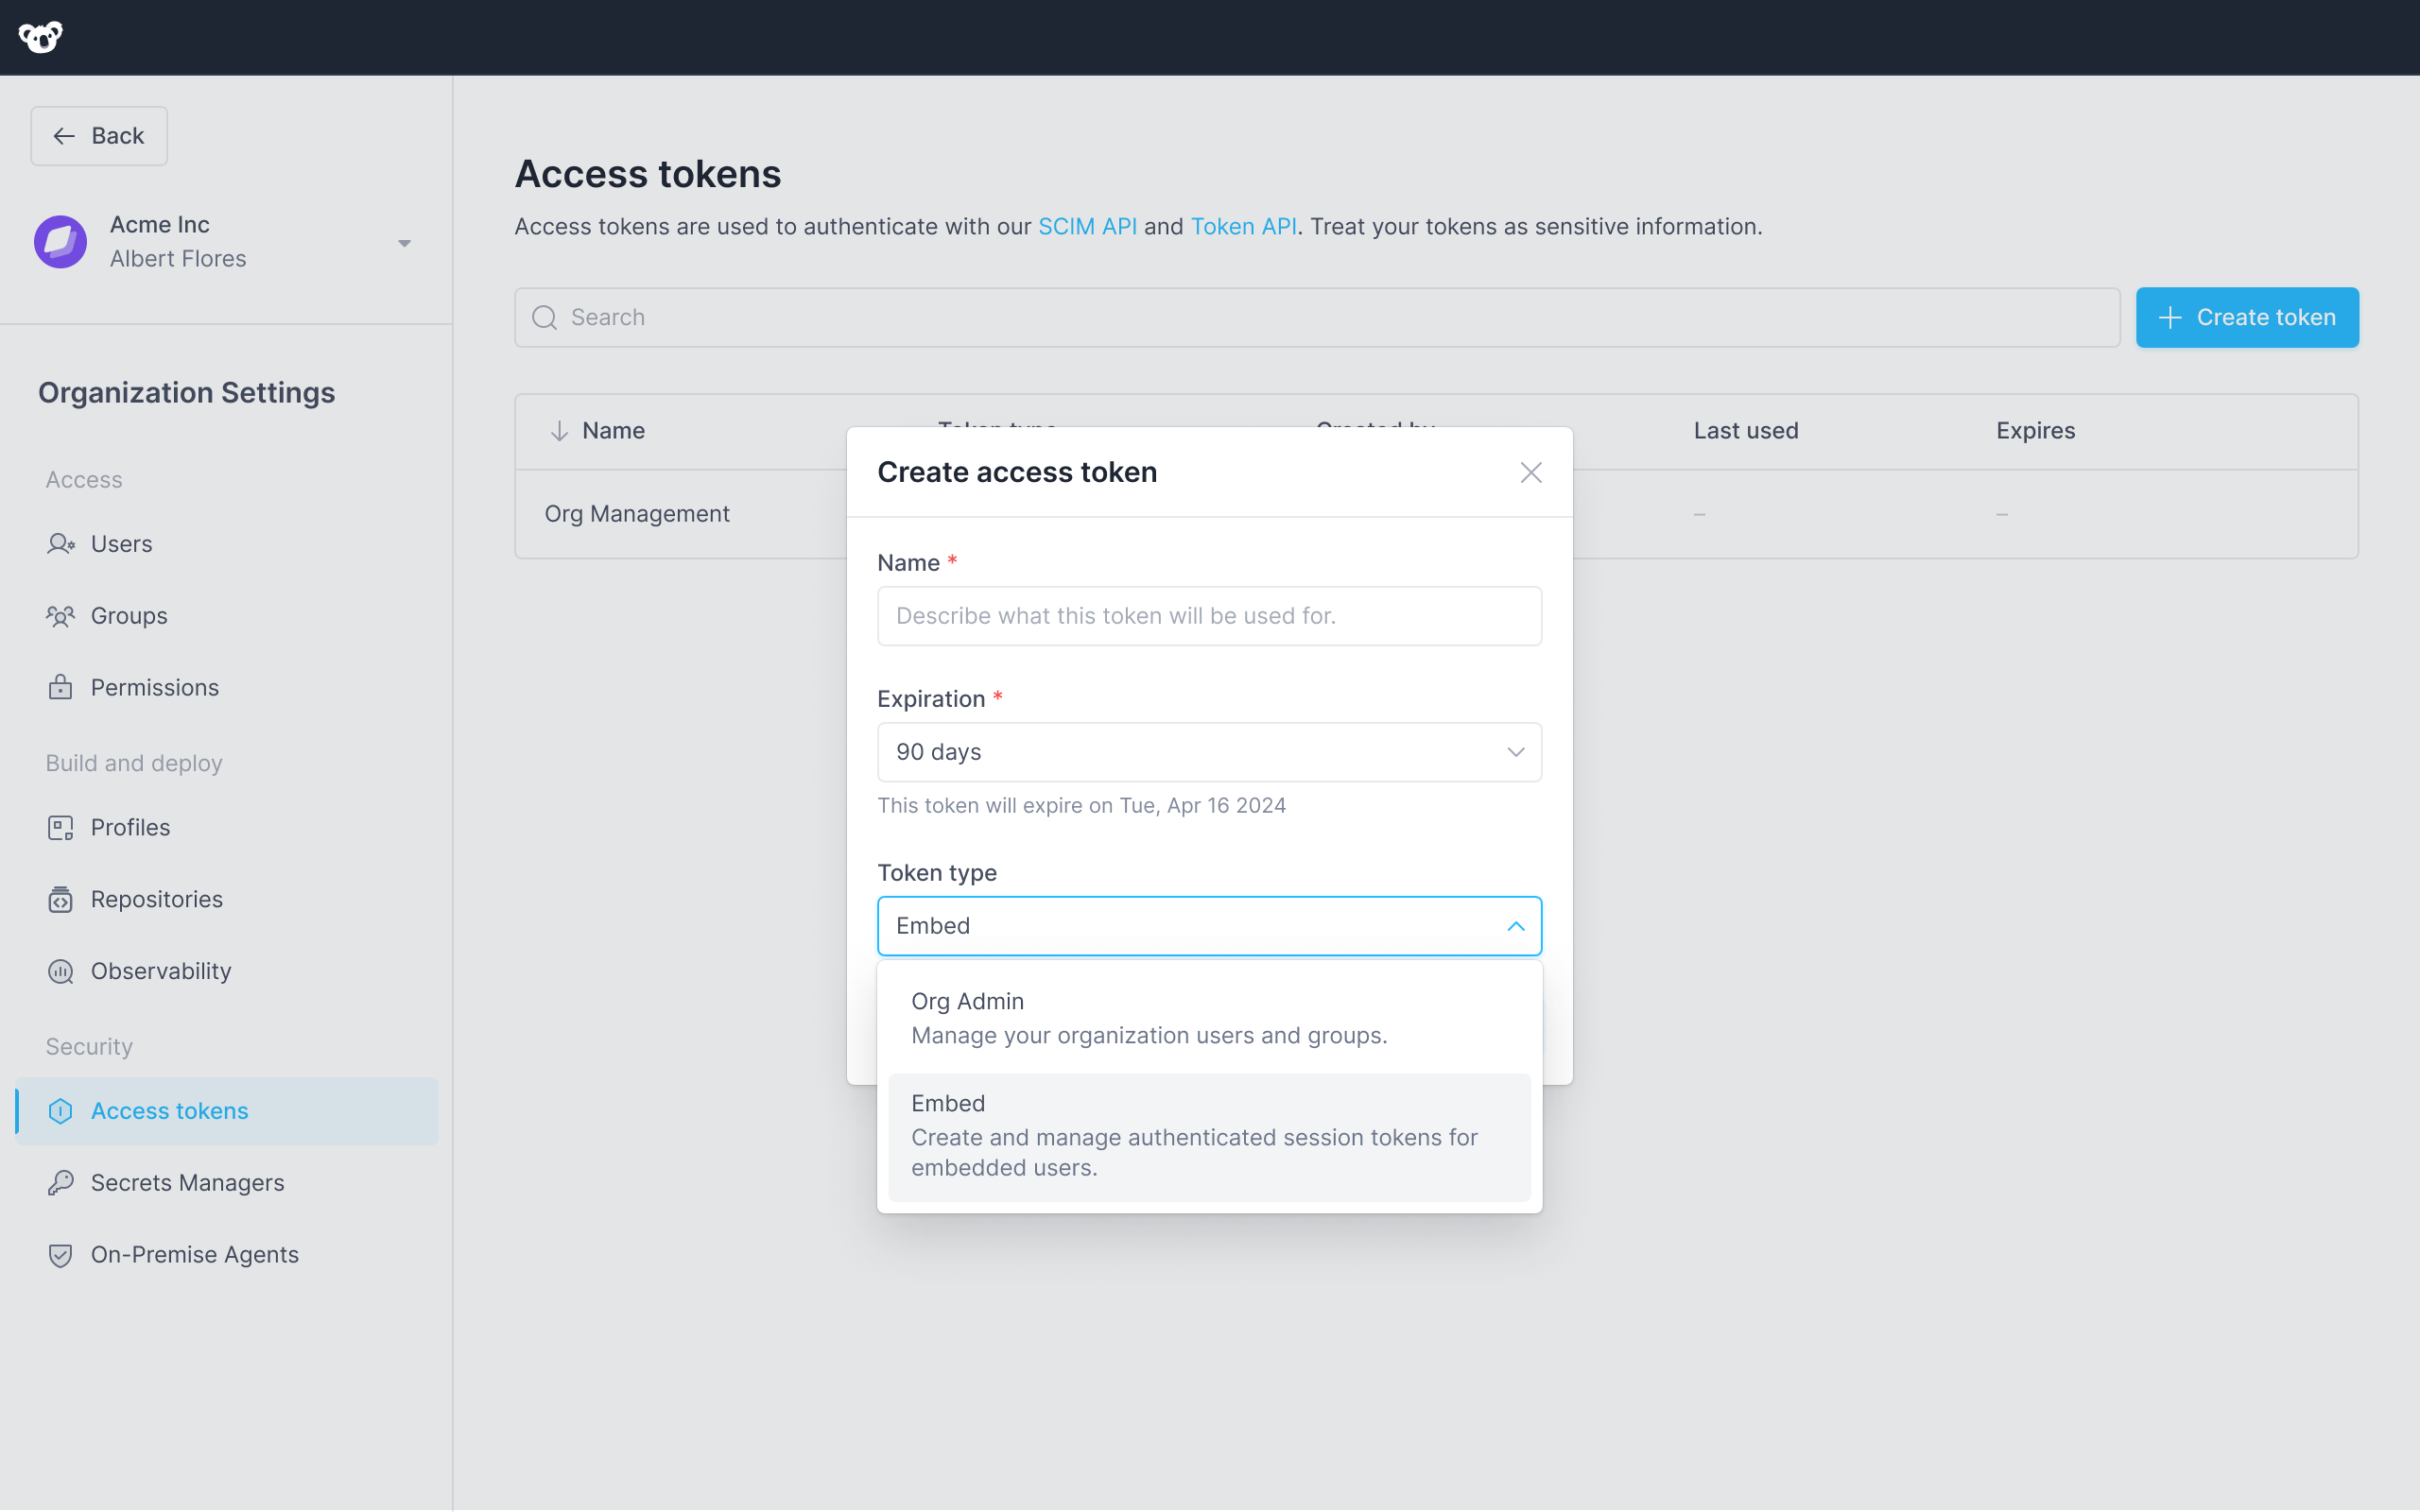 Interface for creating an embed access token